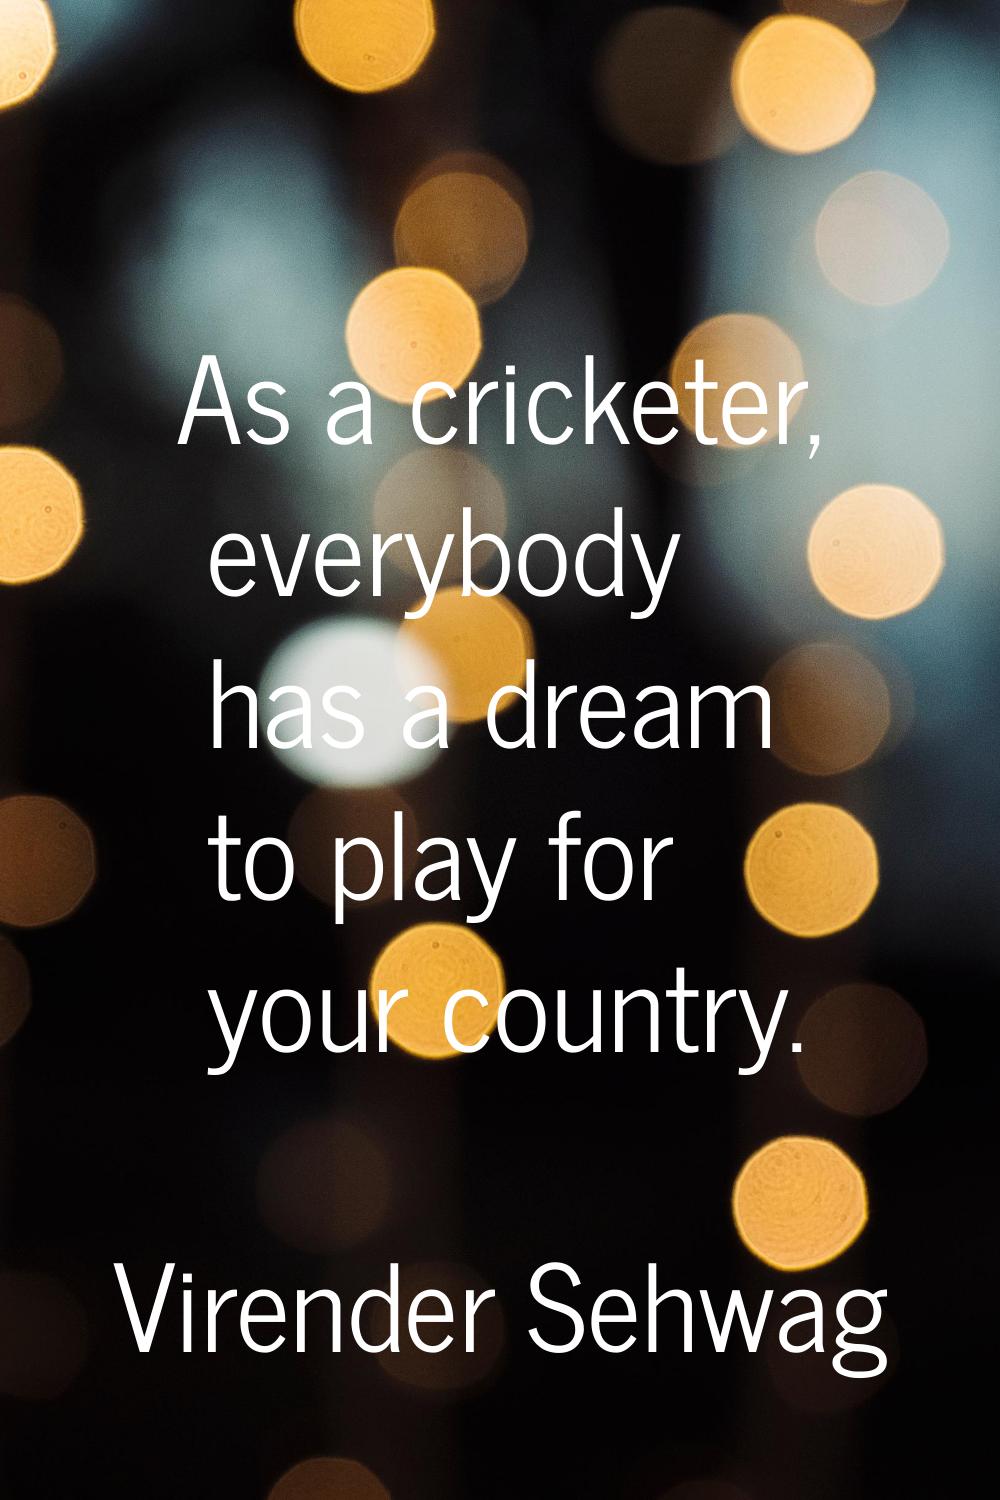 As a cricketer, everybody has a dream to play for your country.